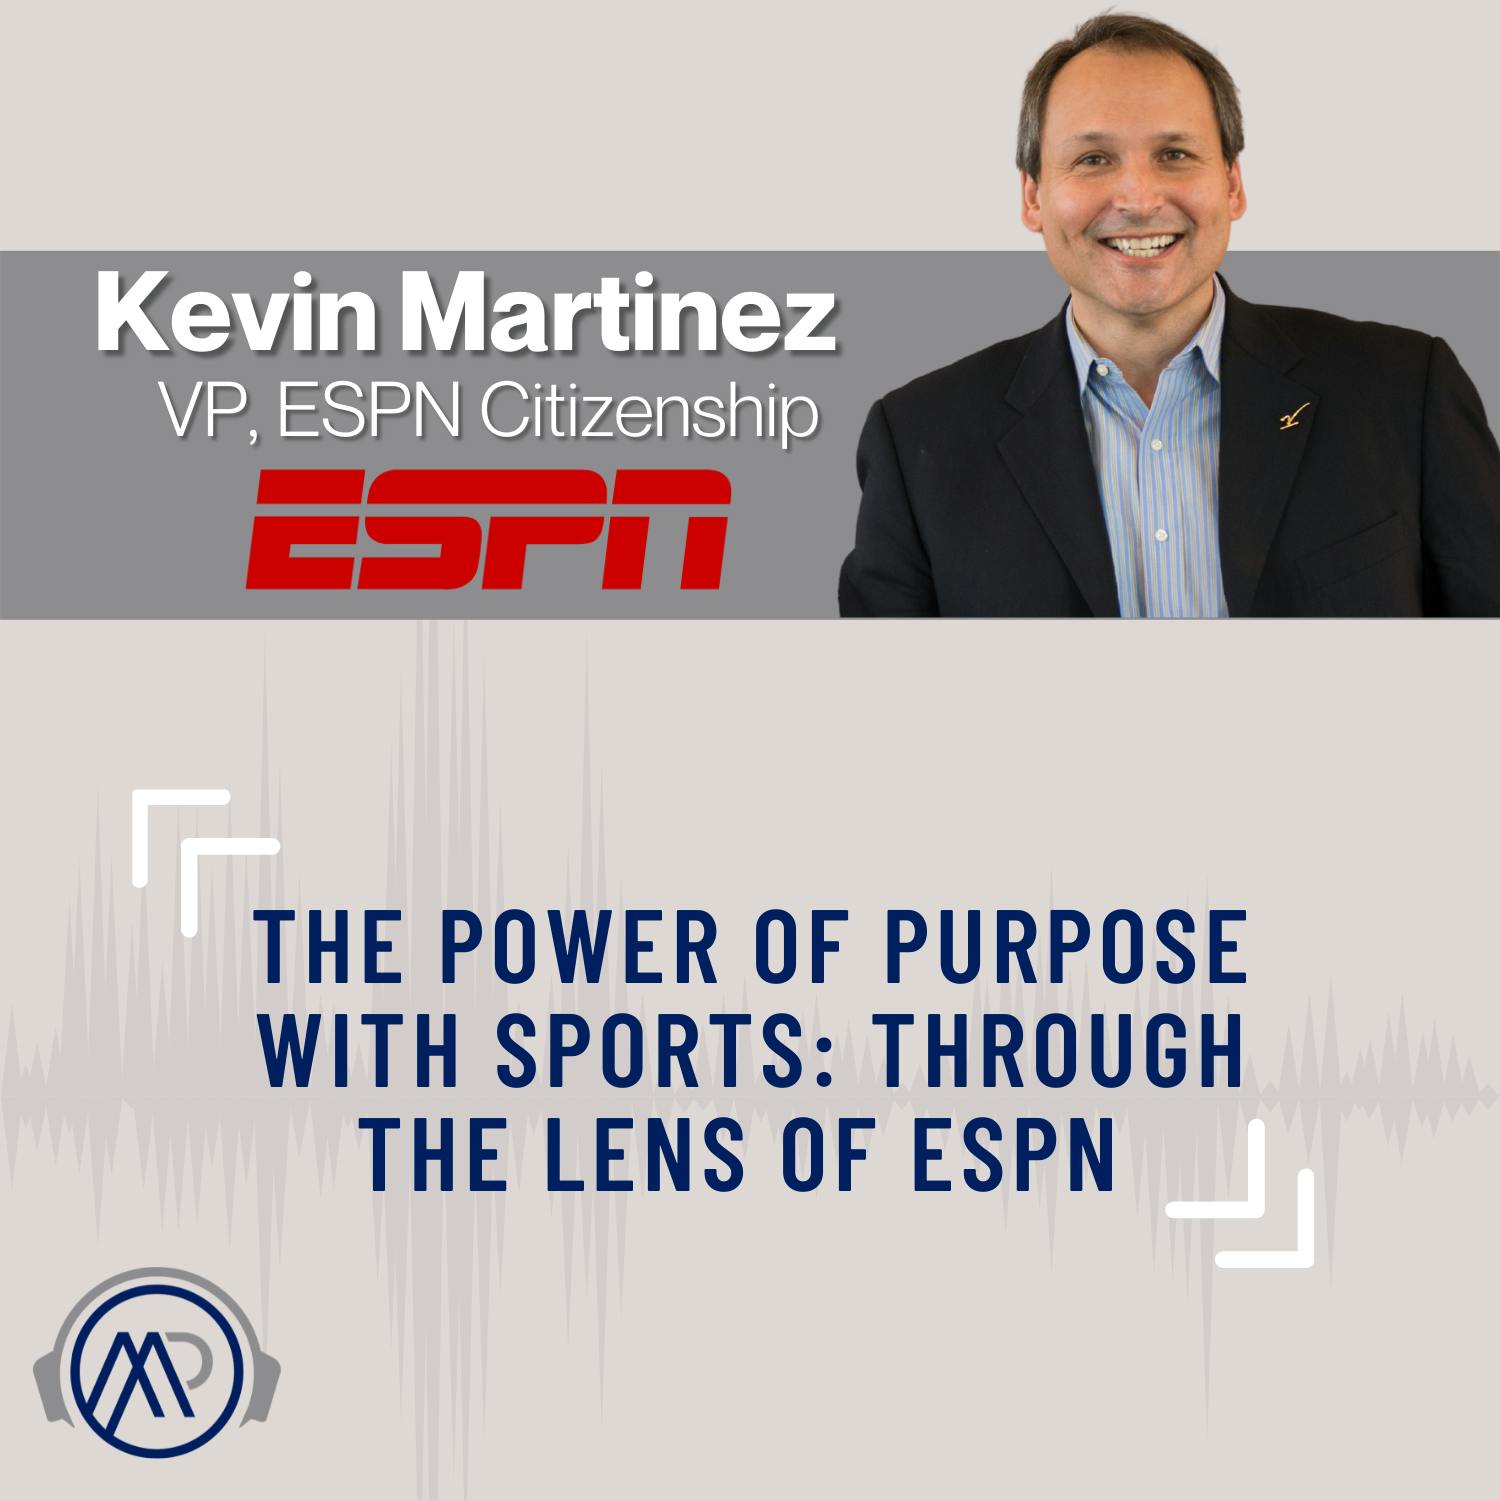 The Power of Purpose with Sports: Through the Lens of ESPN